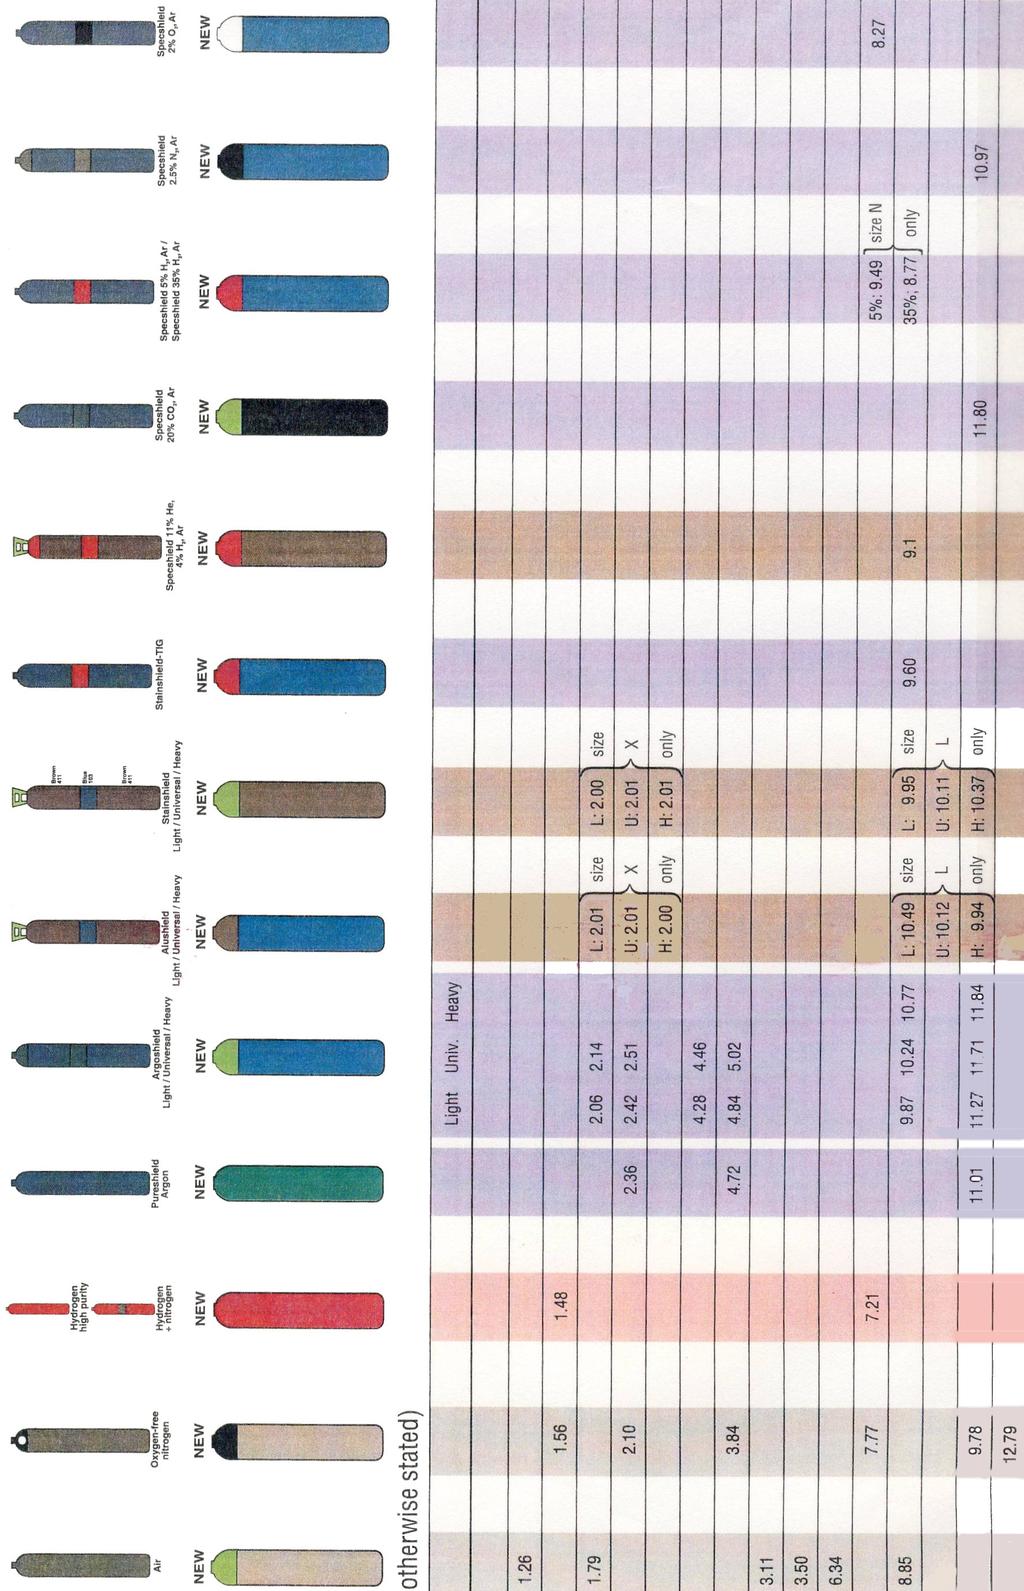 Industrial Gas Cylinders Identification (the numbers shown correspond to colours